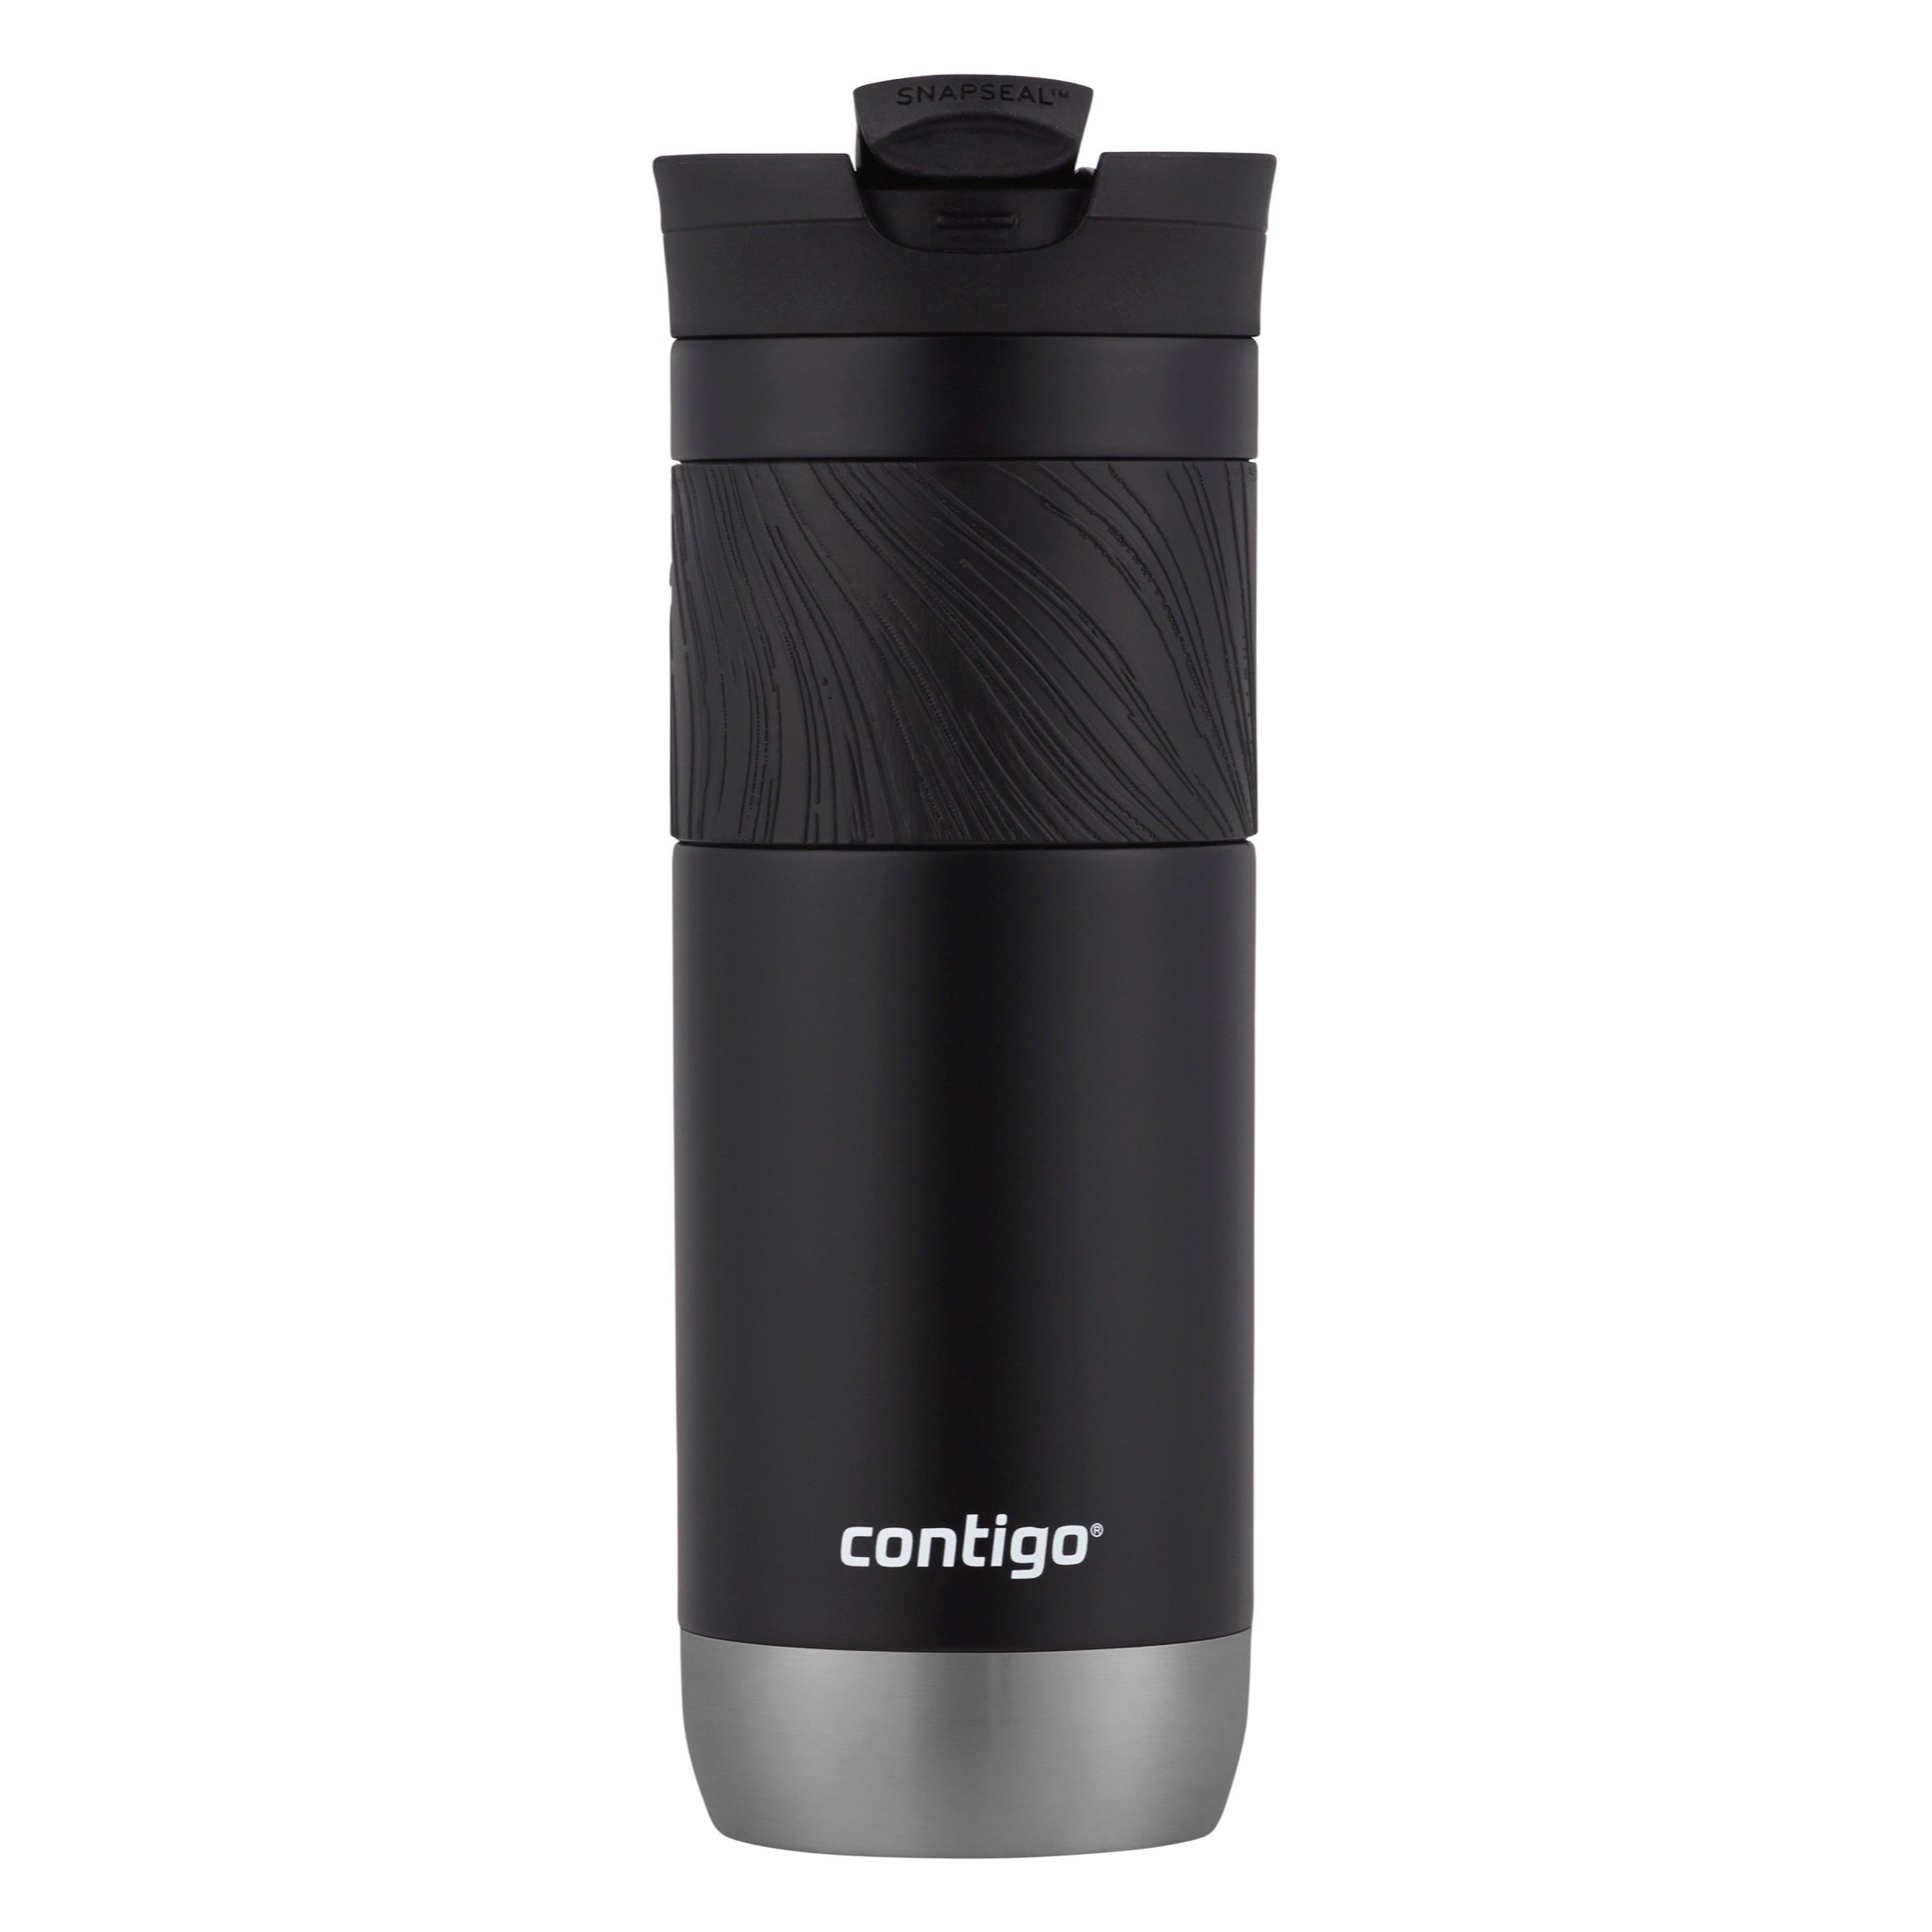 Contigo Byron 2.0 Stainless Steel Travel Mug with SNAPSEAL Lid in Black Licorice, 20 fl oz. - image 3 of 4